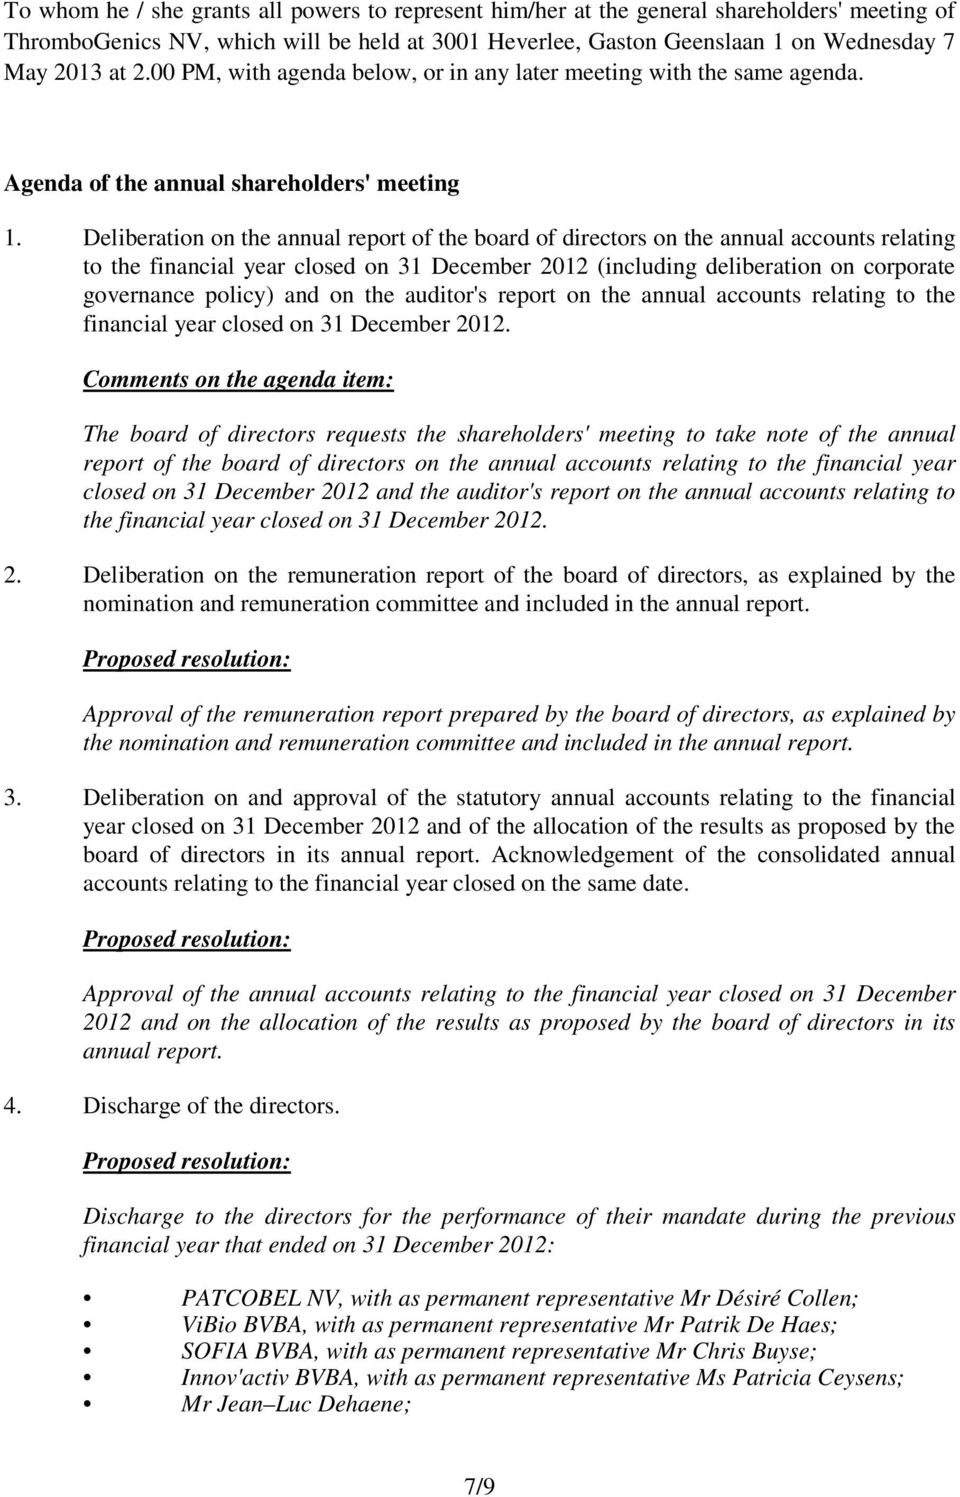 Deliberation on the annual report of the board of directors on the annual accounts relating to the financial year closed on 31 December 2012 (including deliberation on corporate governance policy)